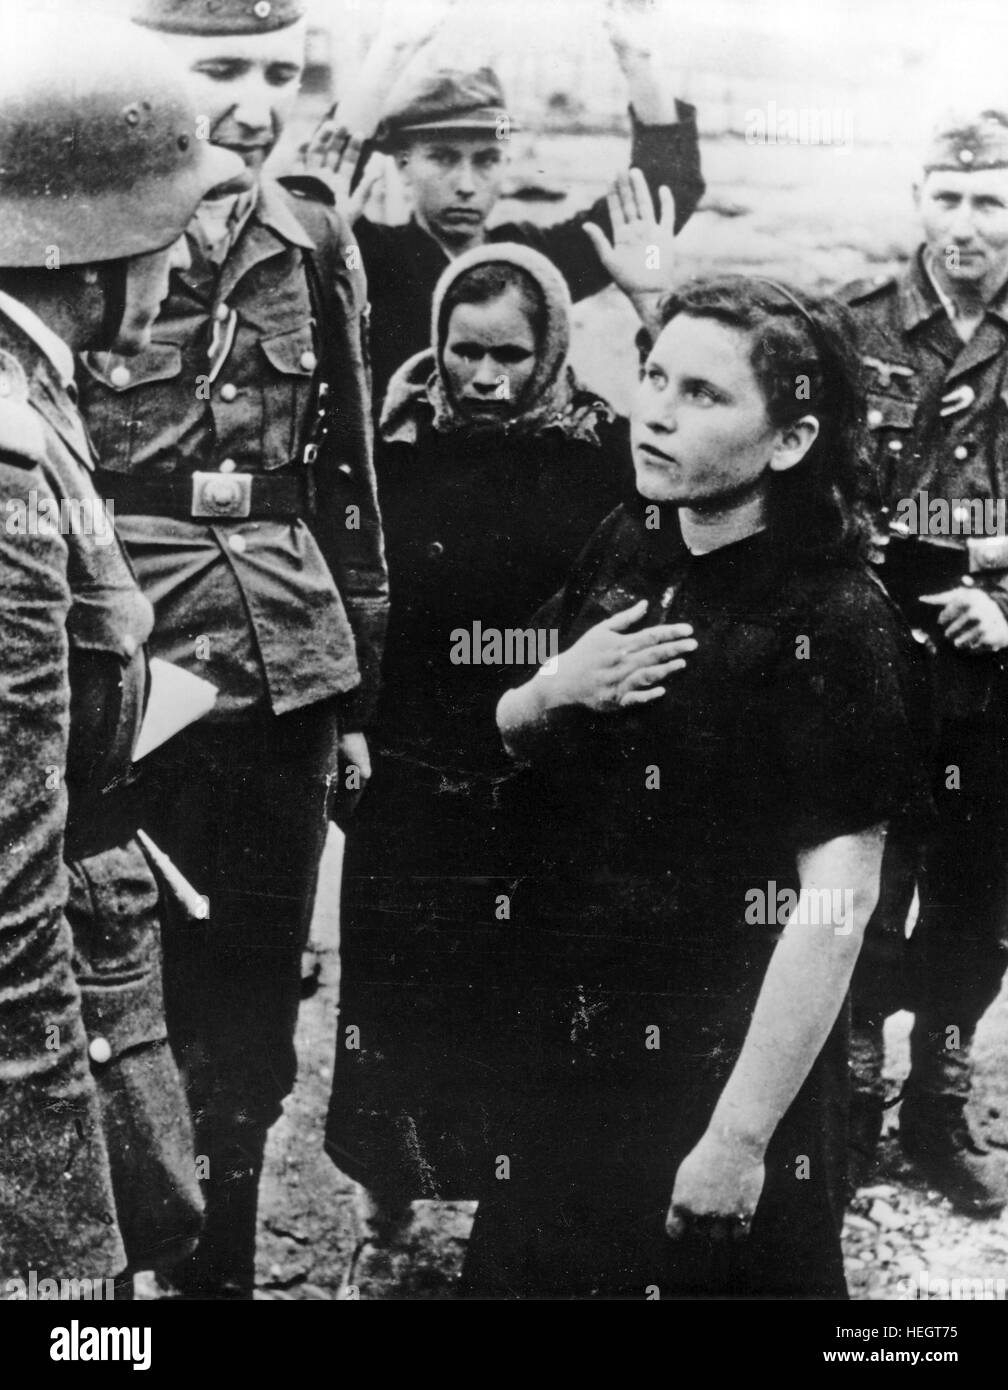 OPERATION BARBAROSSA  1941. German soldiers question a Russian woman during a roundup of suspected partisans.  Photo: Wehrmacht Official Stock Photo